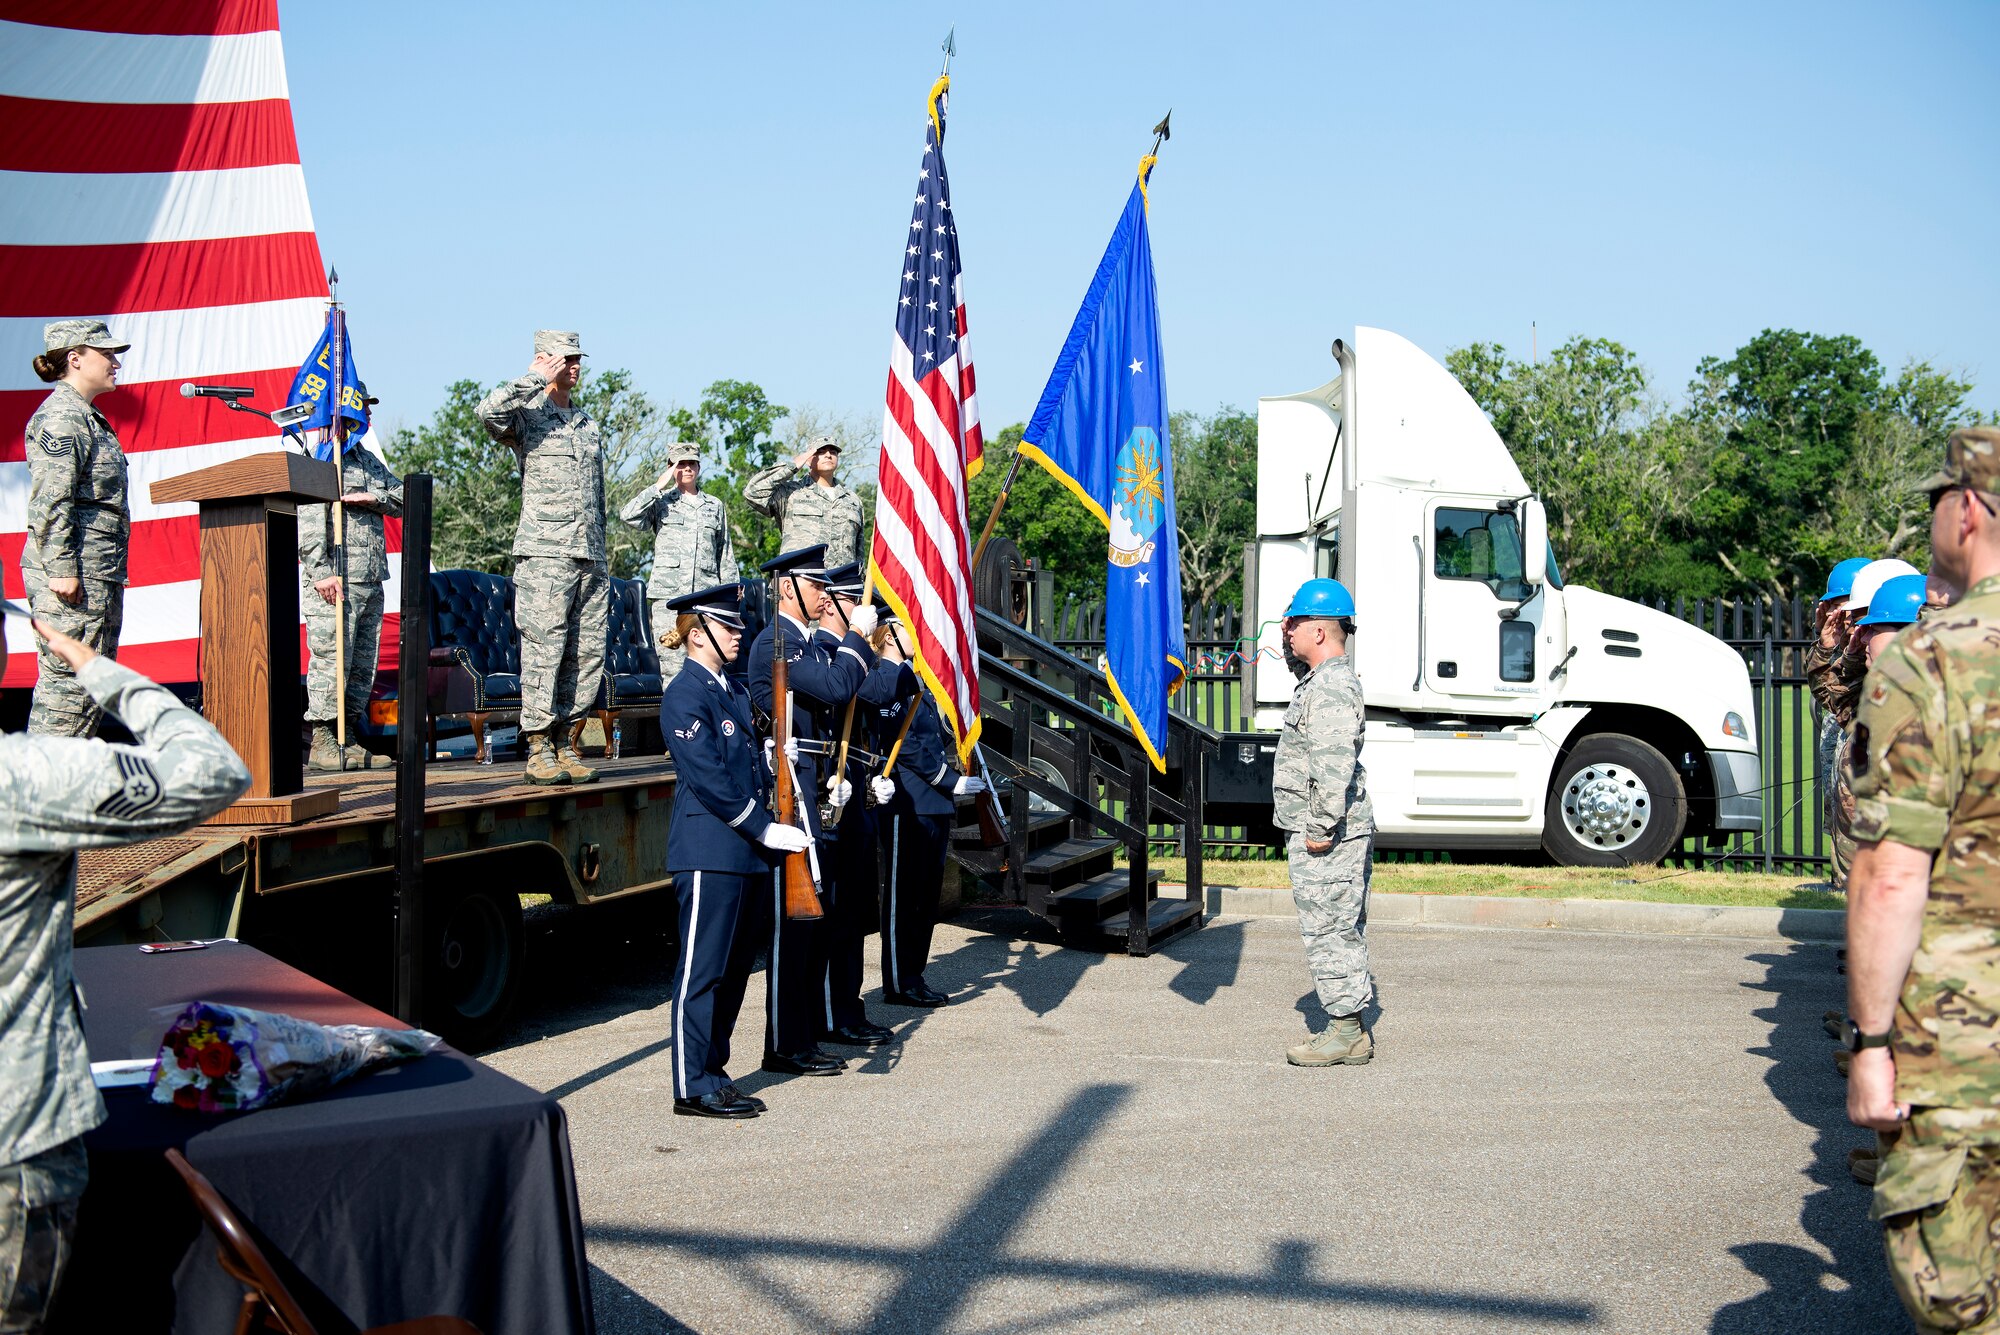 Airmen salute the U.S. flag during the National Anthem at the 85th Engineering Installation Squadron change of command ceremony outside Maltby Hall on Keesler Air Force Base, Mississippi, June 4, 2019. The ceremony is a symbol of command being exchanged from one commander to the next. (U.S. Air Force photo by Airman 1st Class Kimberly L. Mueller)